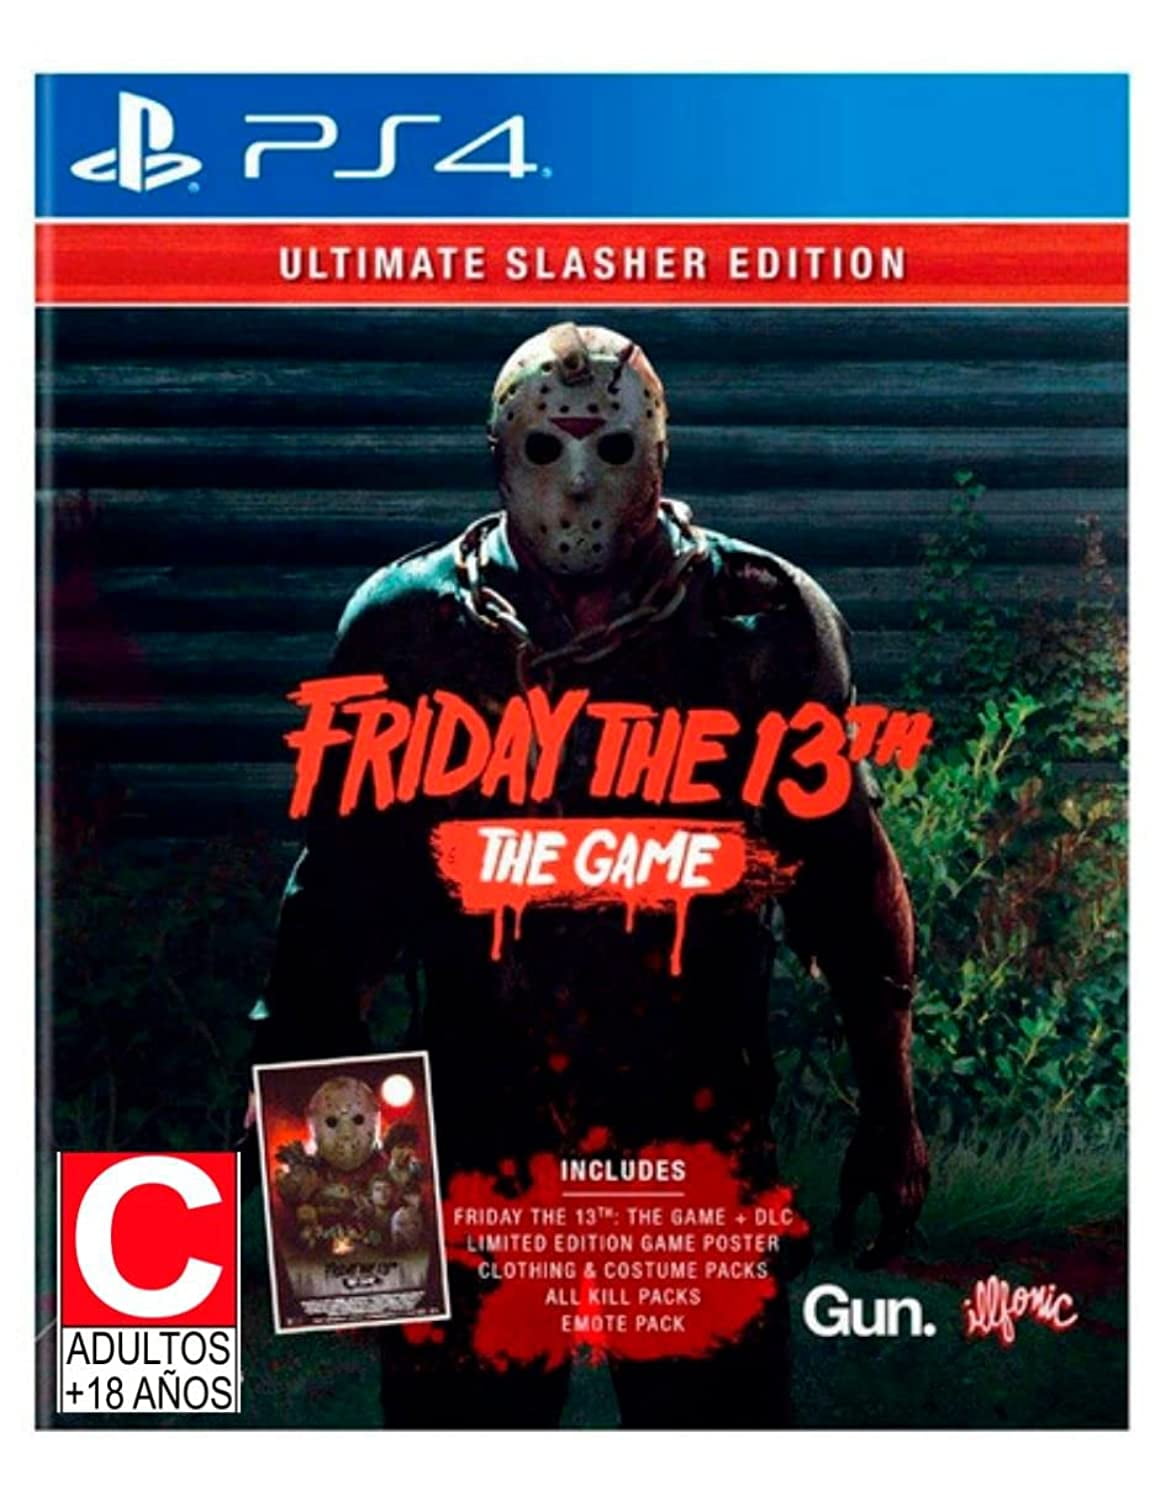 Friday The 13th Game on X: Your shot at scoring some awesome